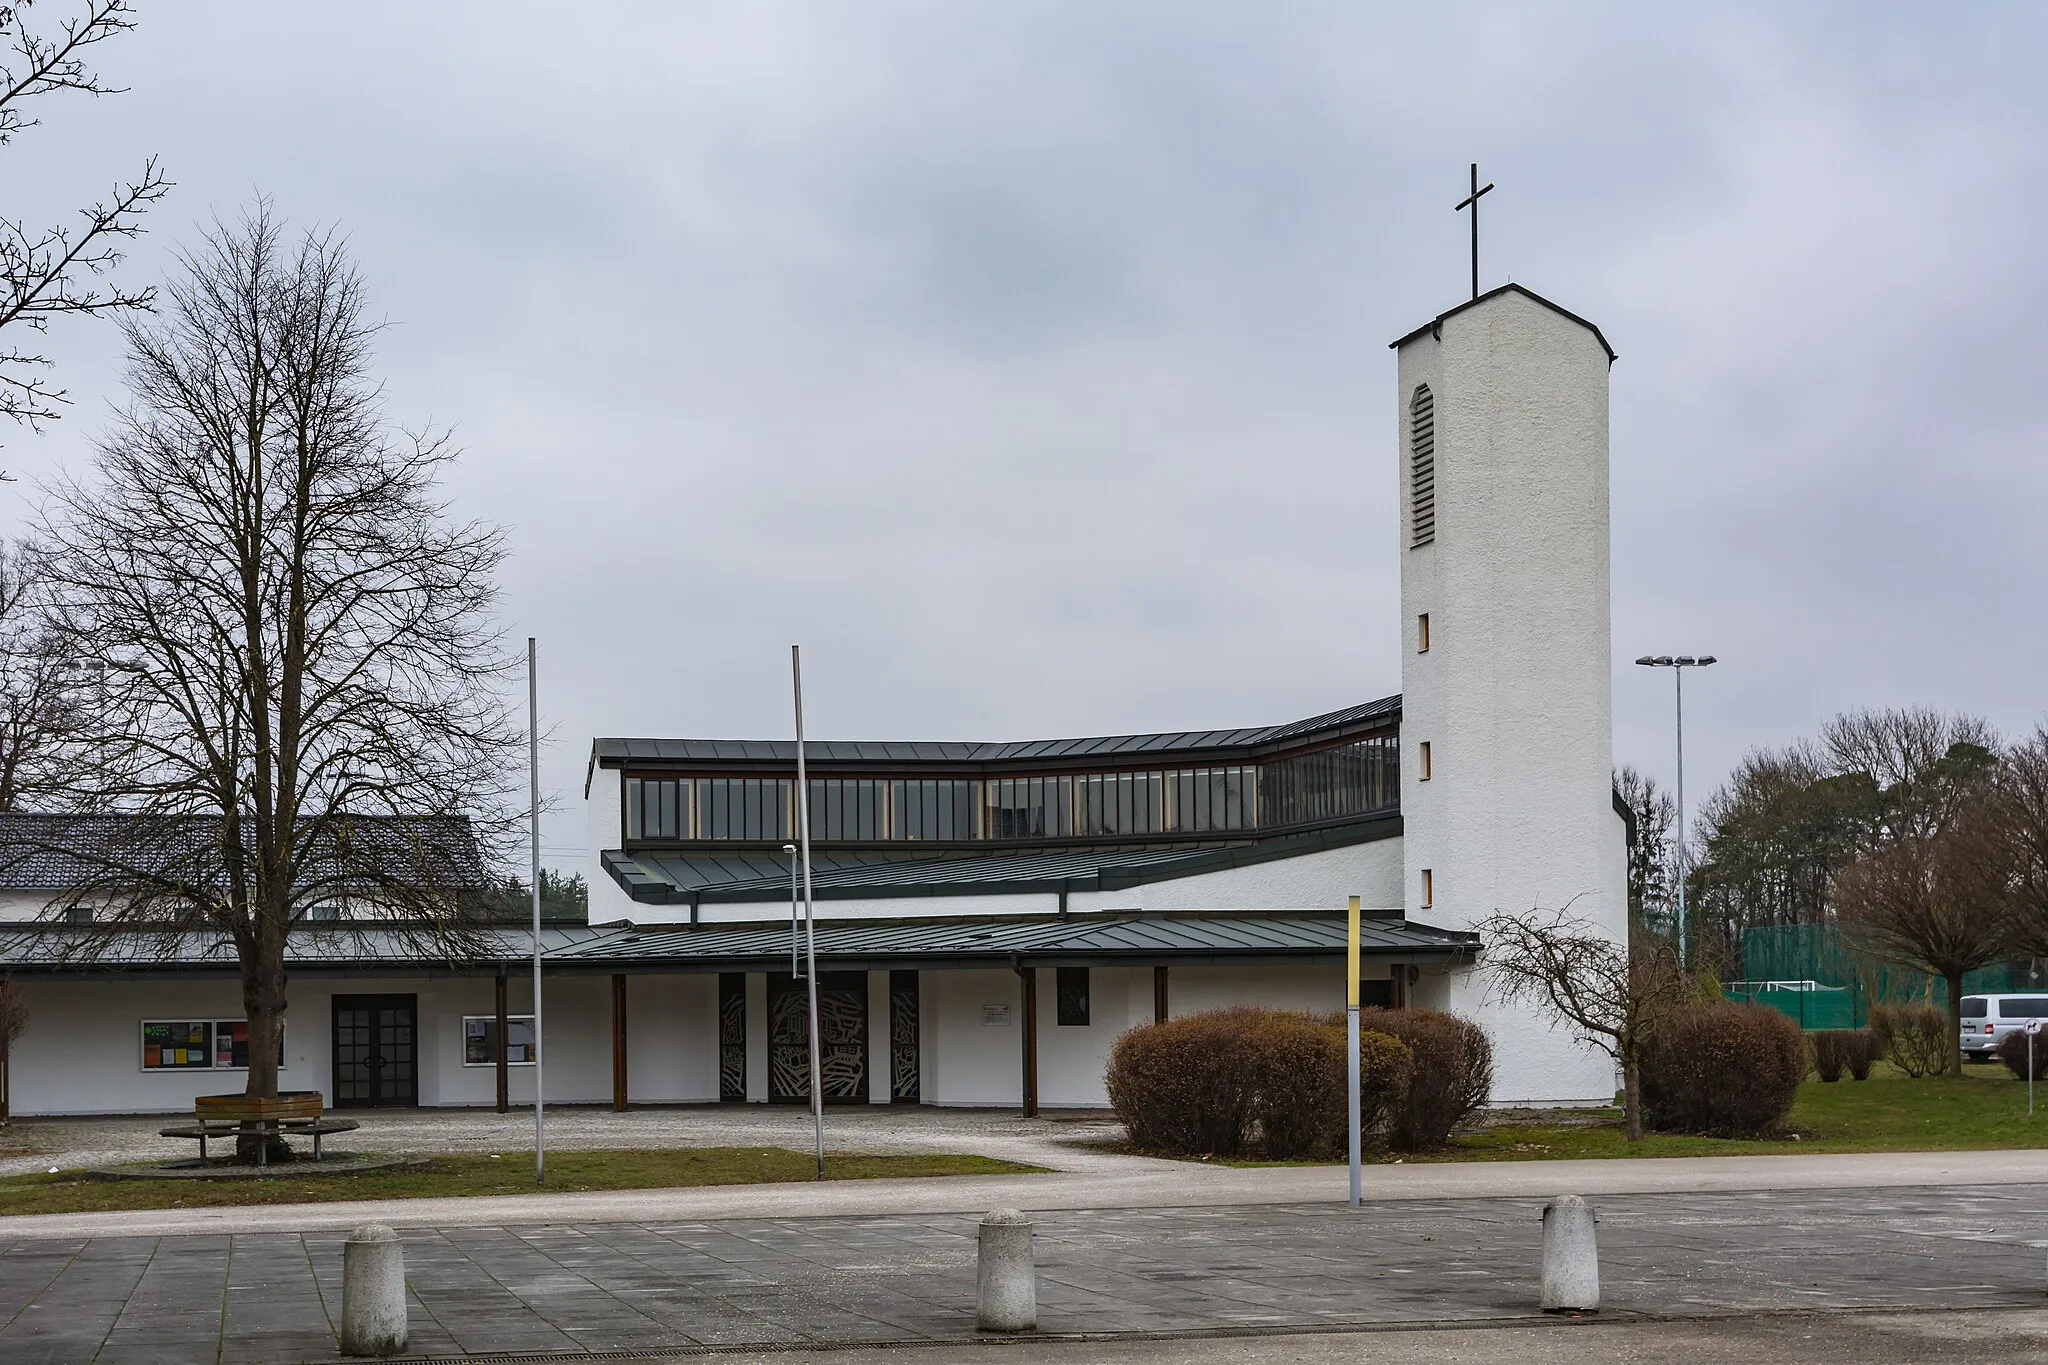 Photo showing: The parish church of Traun-Oedt was erected in 1988/89. It is dedicated to St. Joseph, foster father of Jesus.